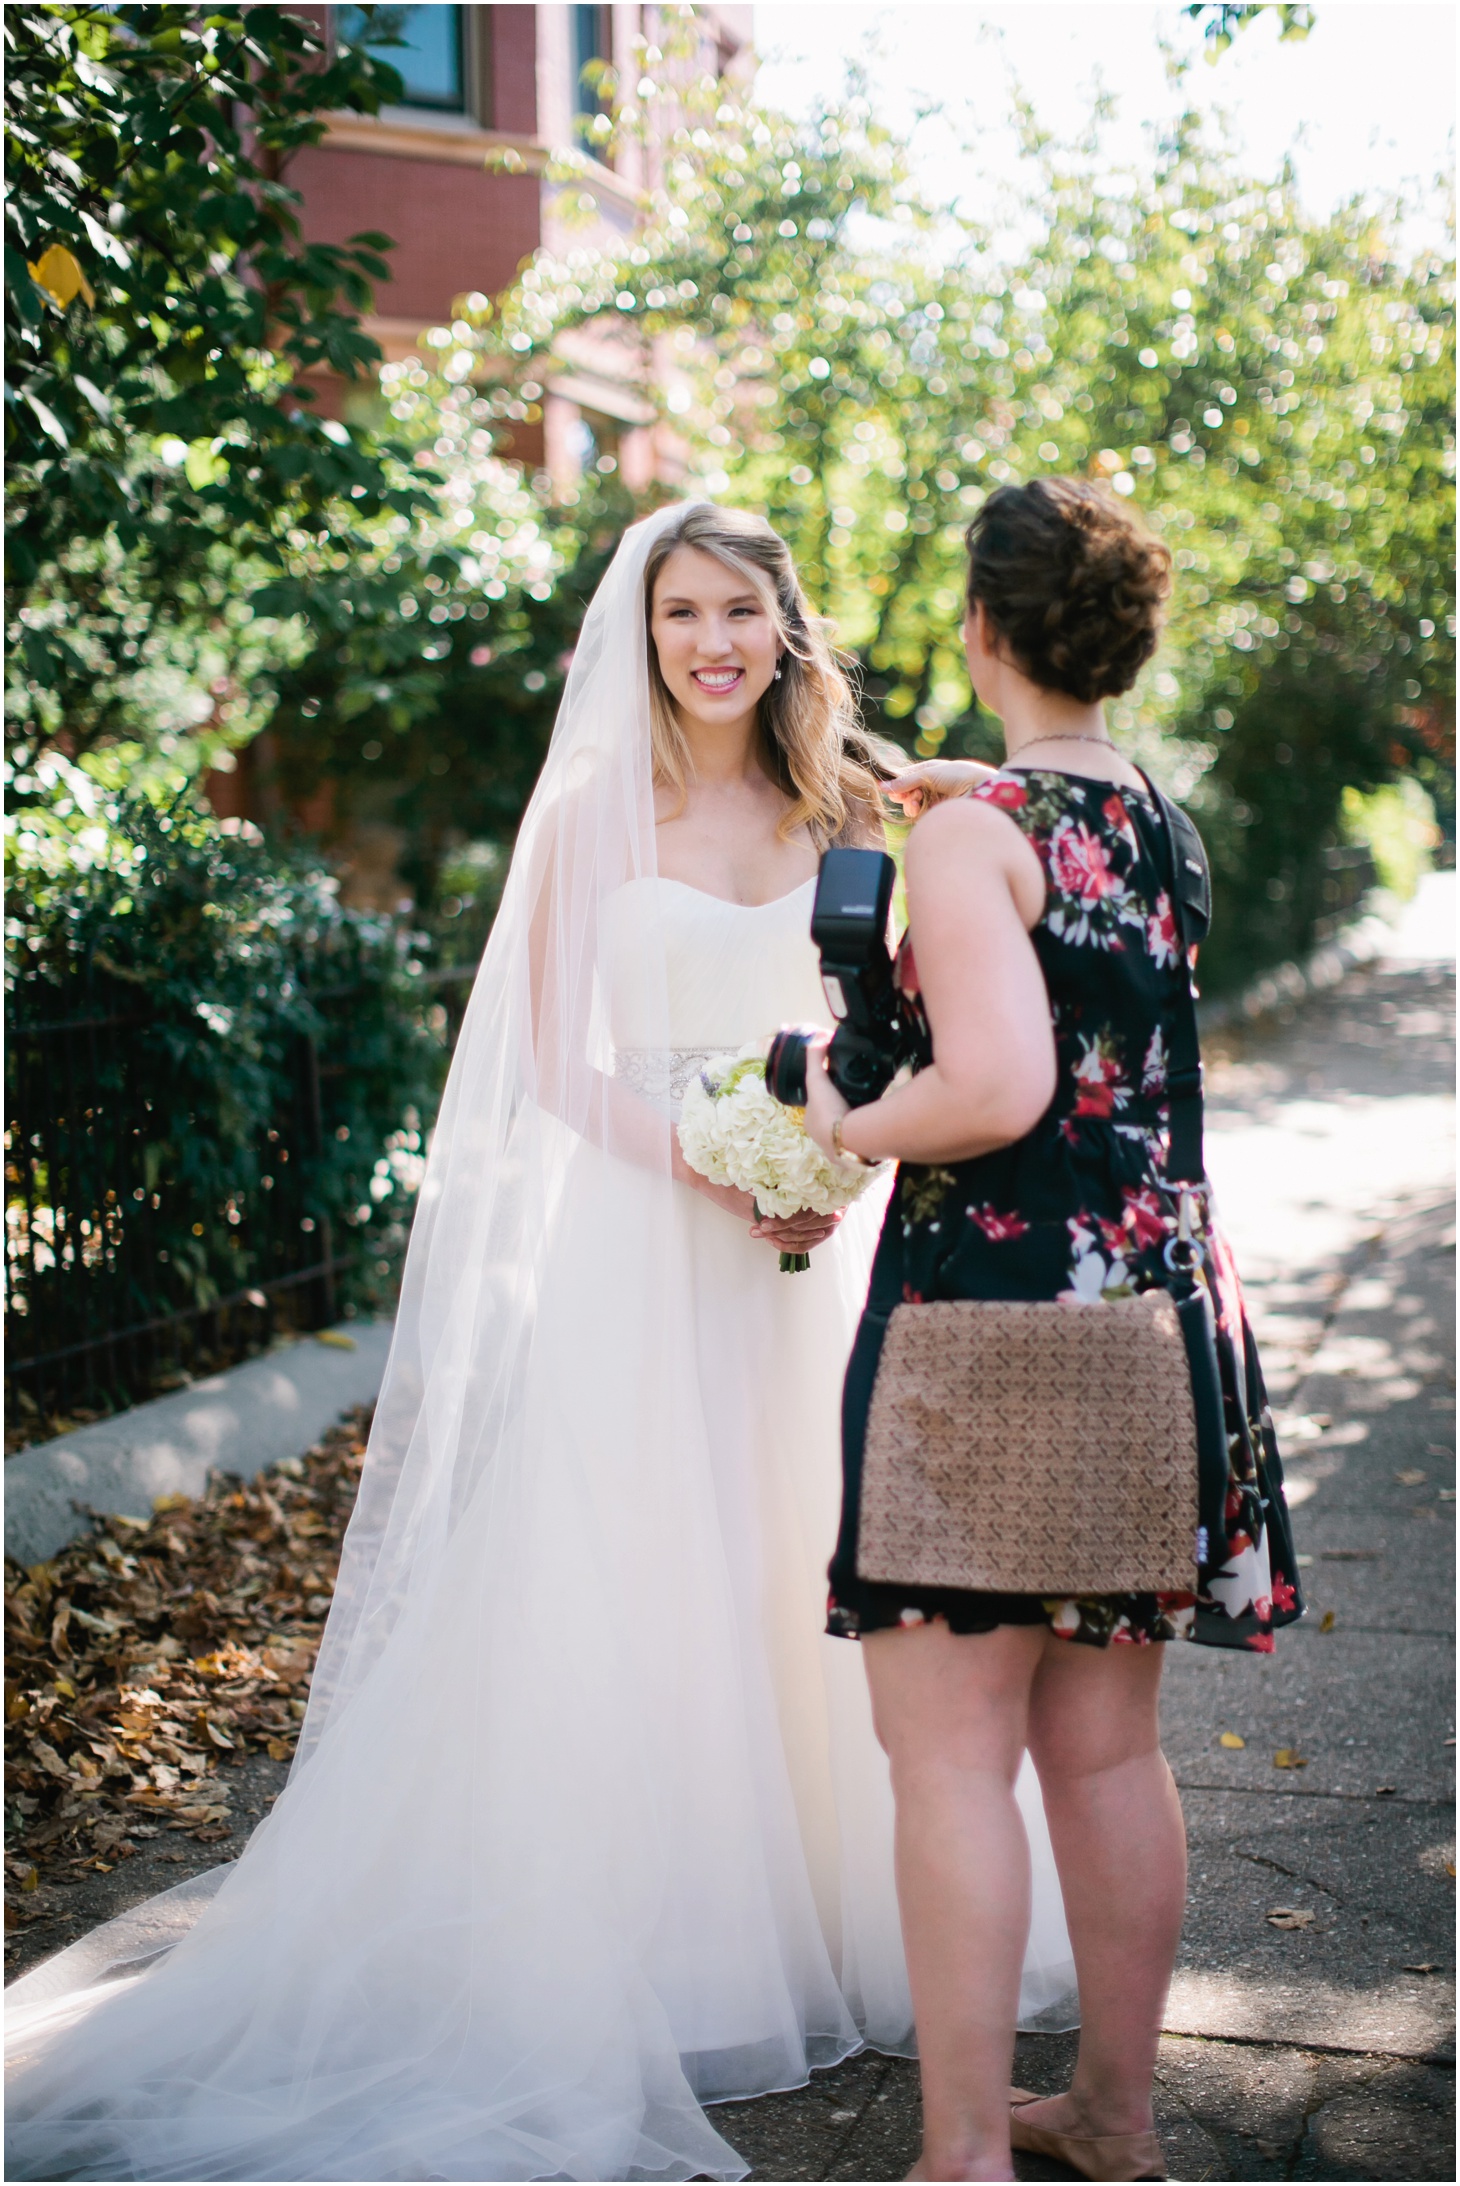 Behind the Scenes in 2014 - Weddings by Sarah Bradshaw Photography_0131